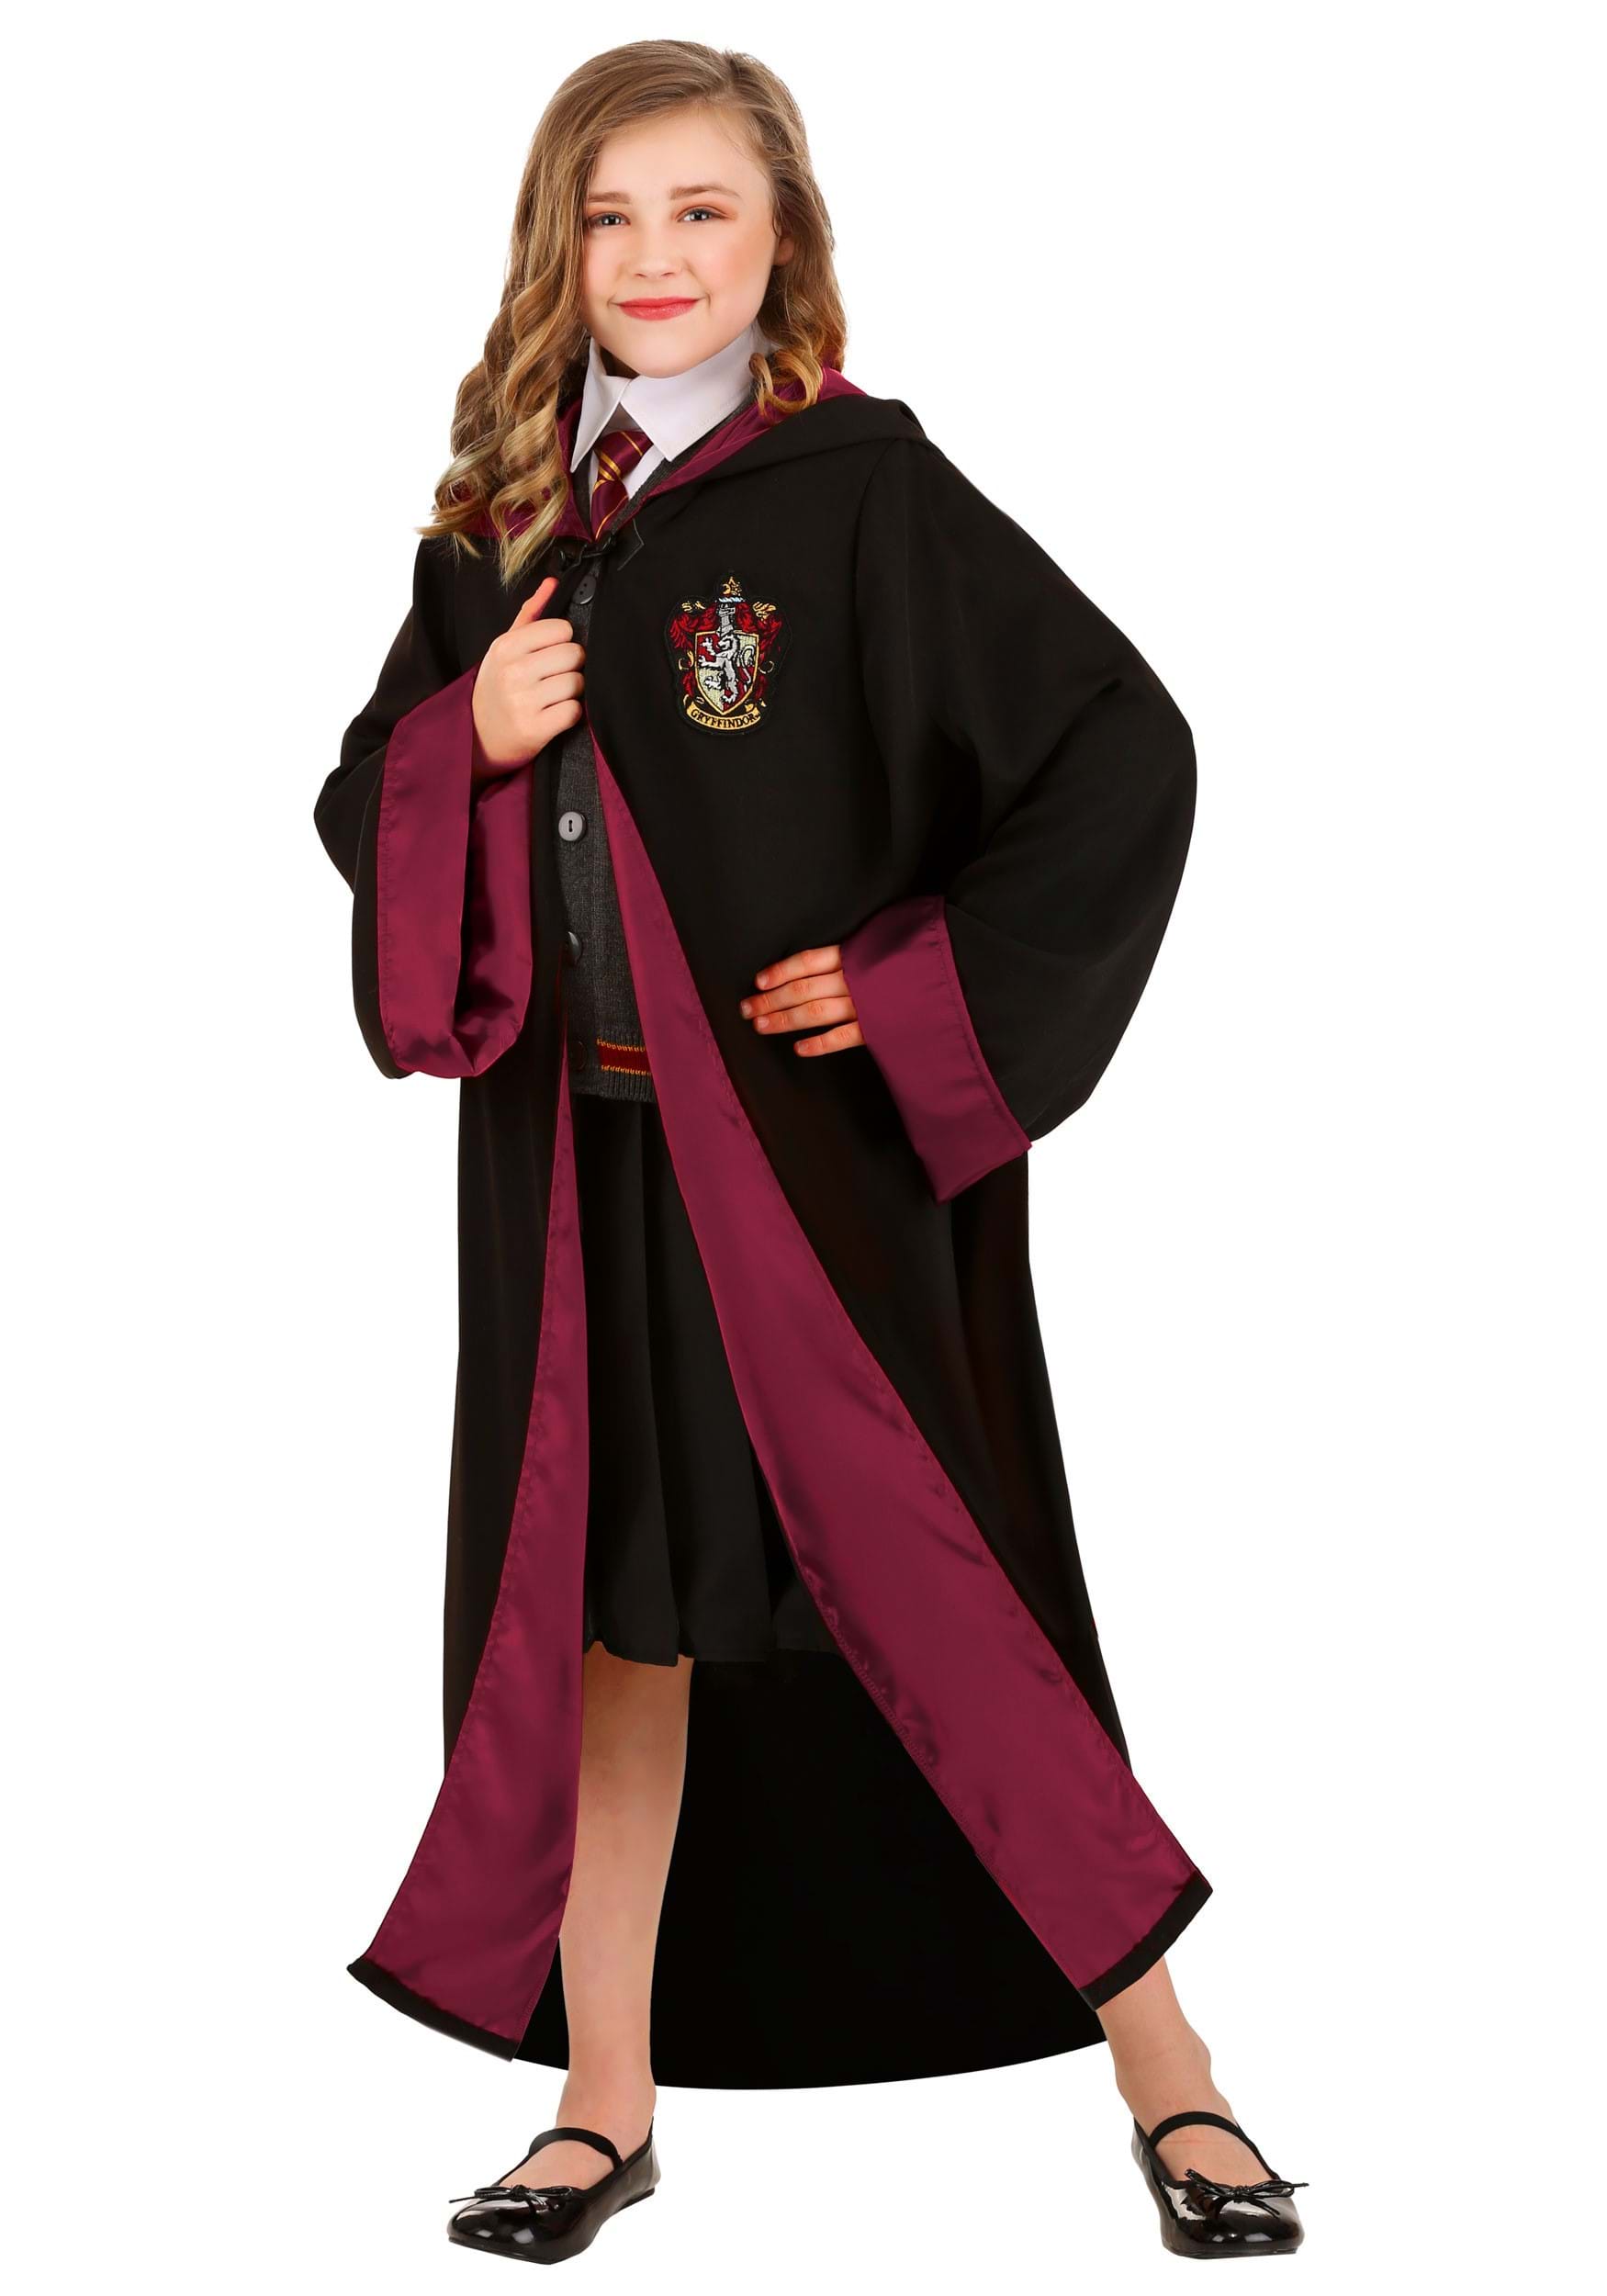 Photos - Fancy Dress Deluxe Jerry Leigh  Harry Potter Hermione Costume for Kids Black/Red 